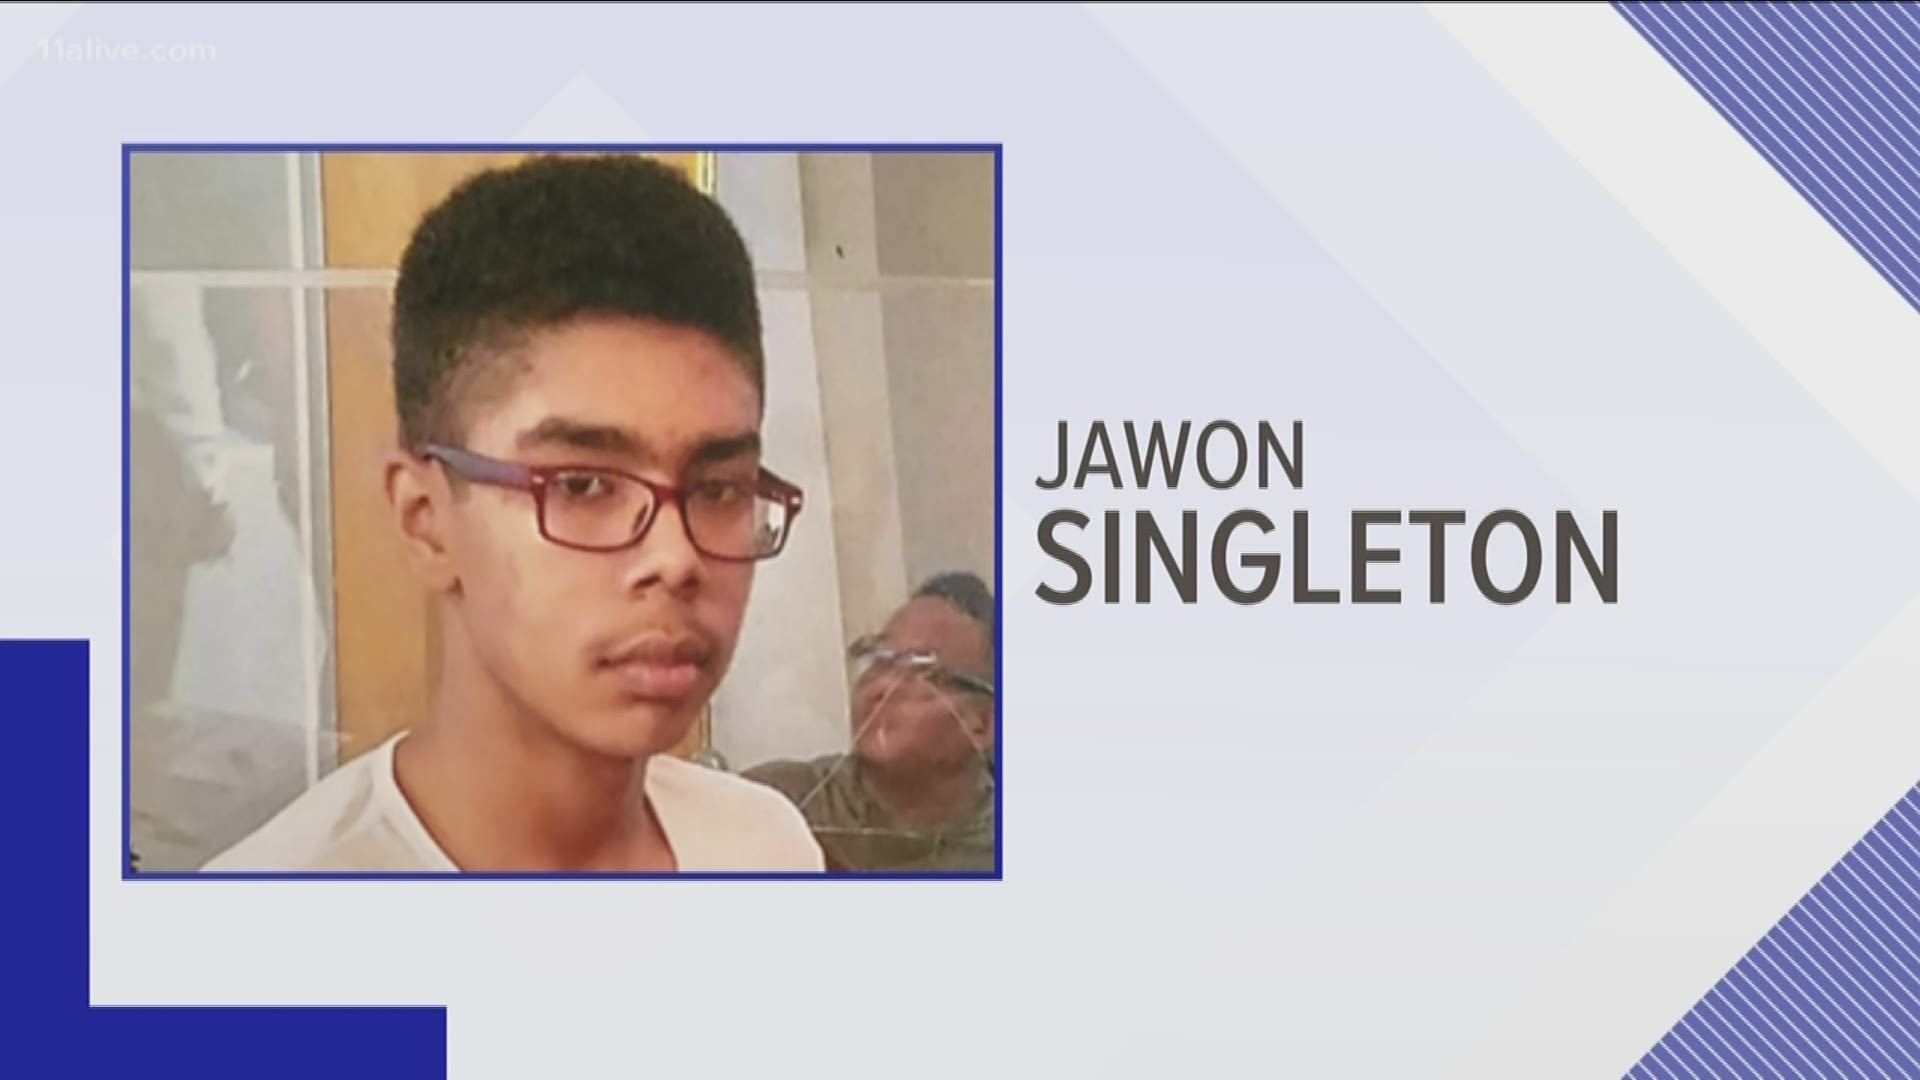 Jawon Singleton was reported missing from his home Thursday night in the 600 block of Willard Avenue SW by his father.